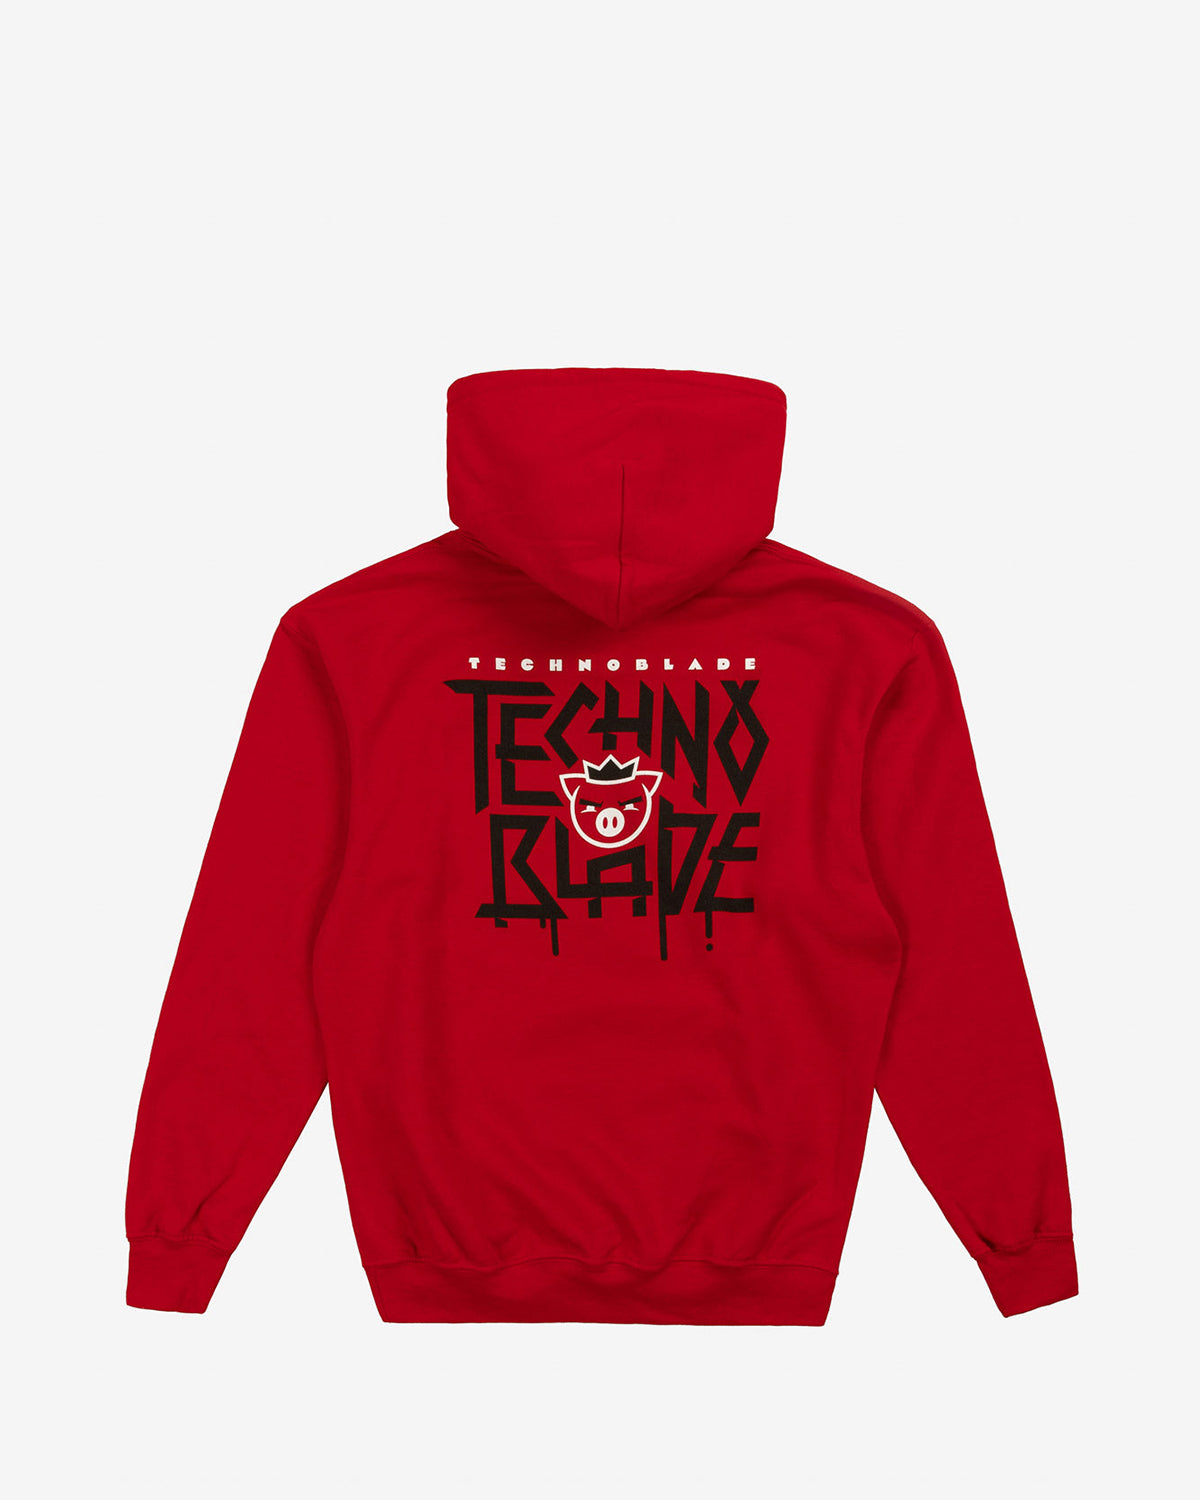 Technoblade 'Agro' Pullover Youth Hoodie (Black)